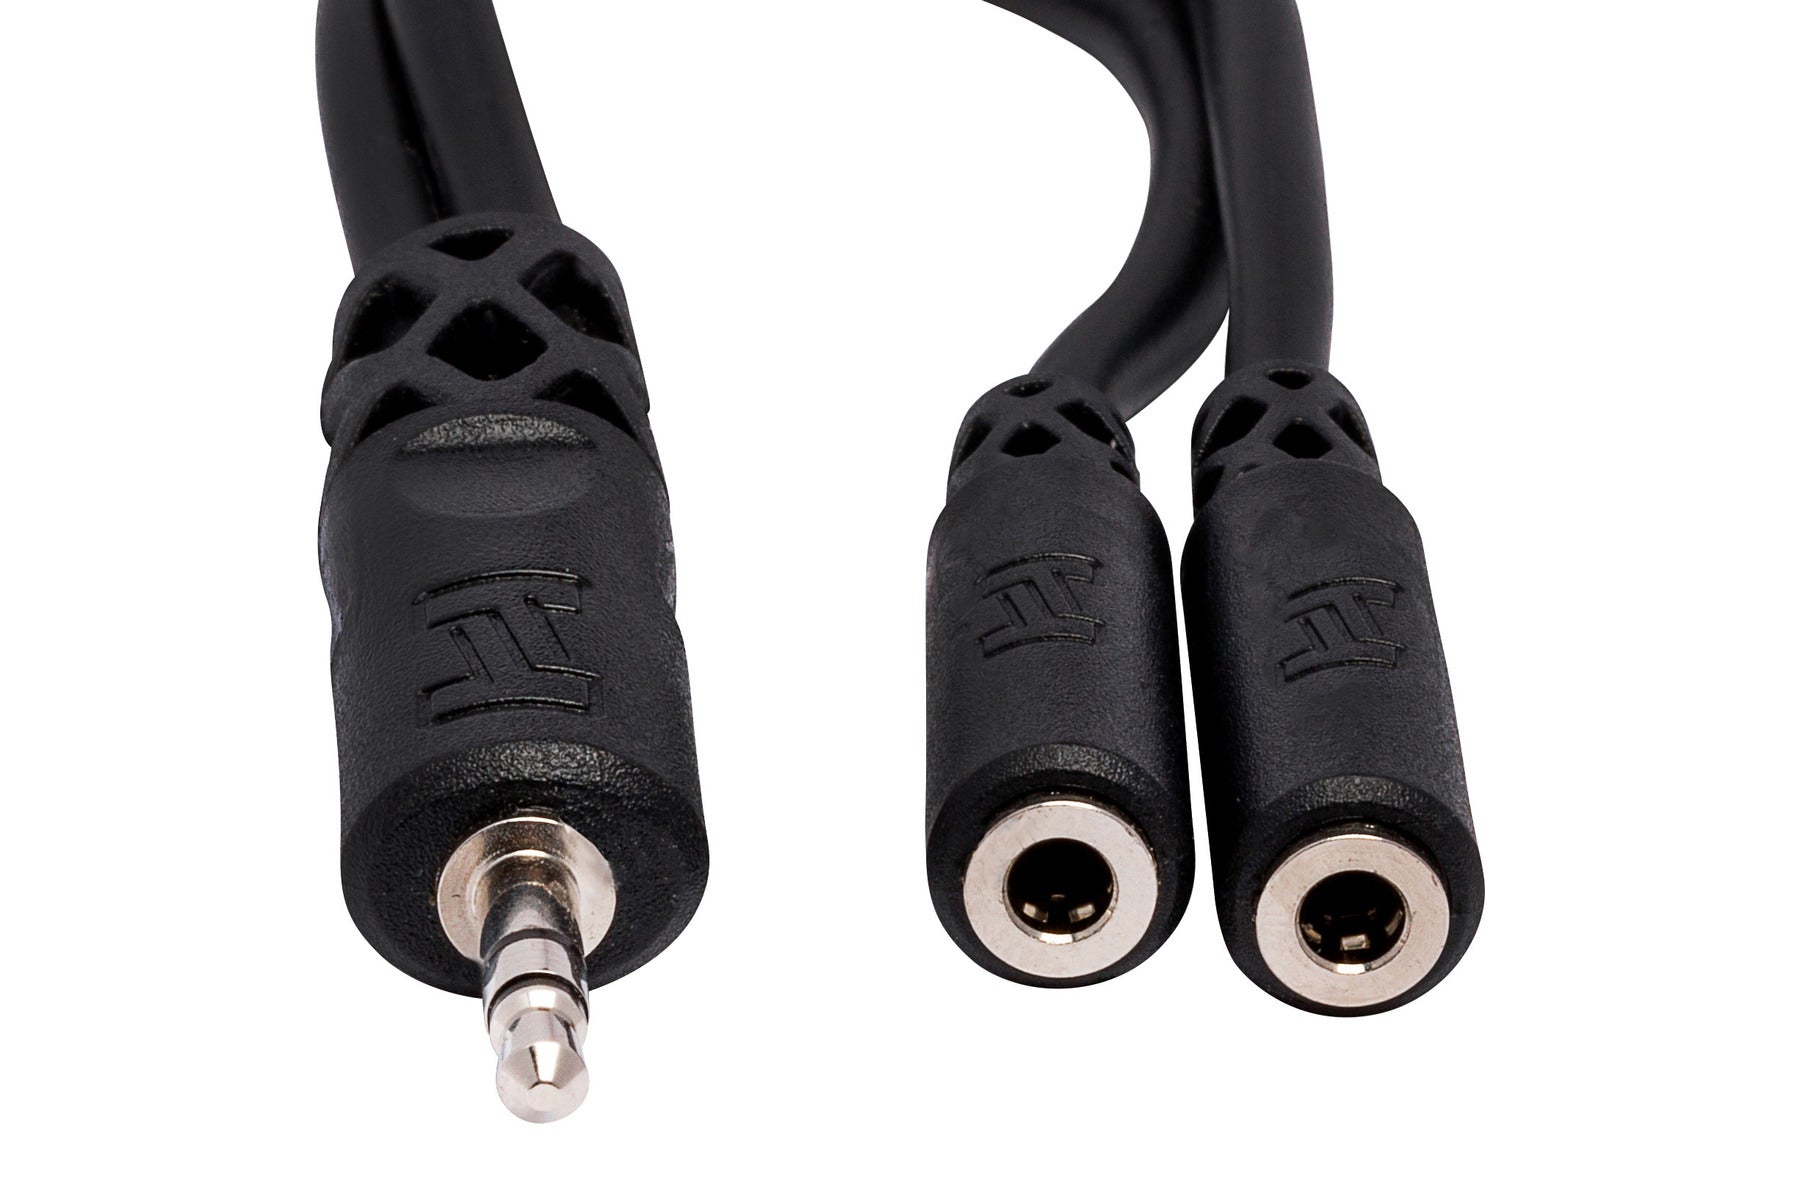 Hosa YMM-232 Y Cable, 3.5 mm TRS to Dual 3.5 mm TRSF